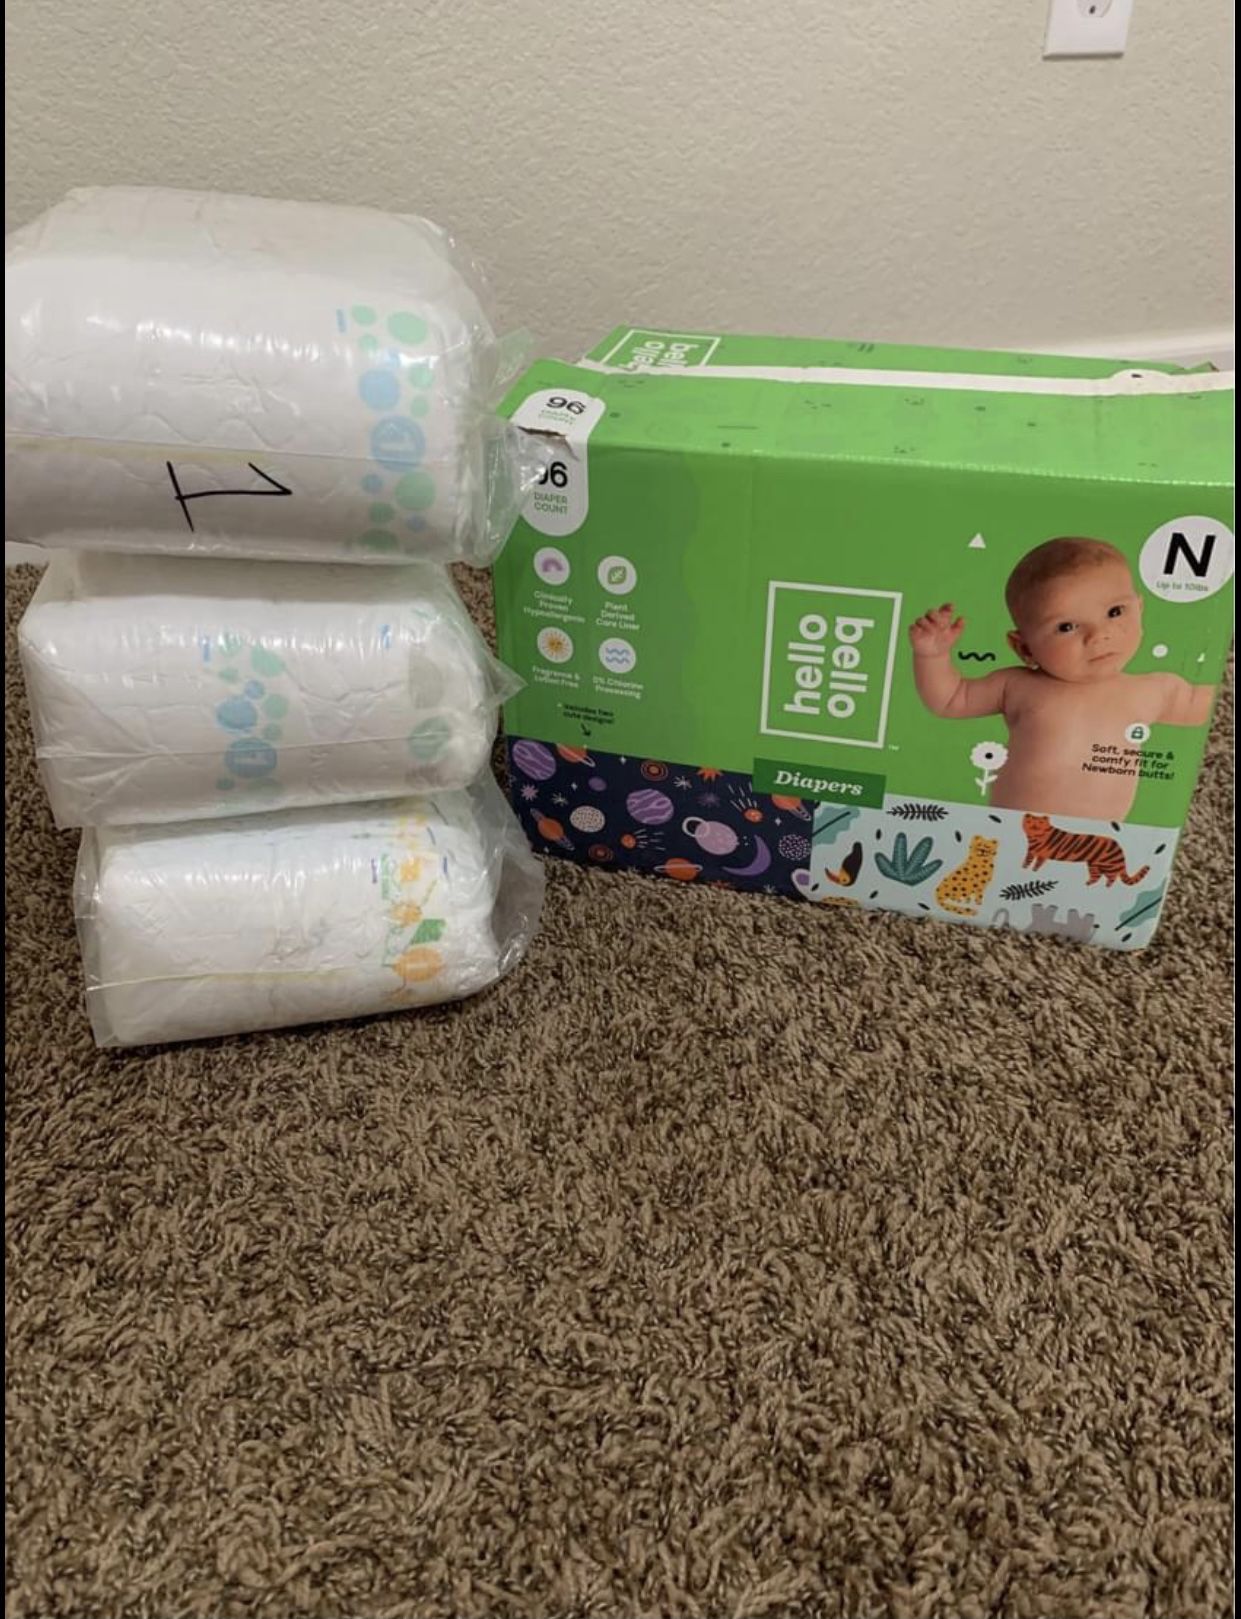 Size 1 diapers and size Newborn diapers